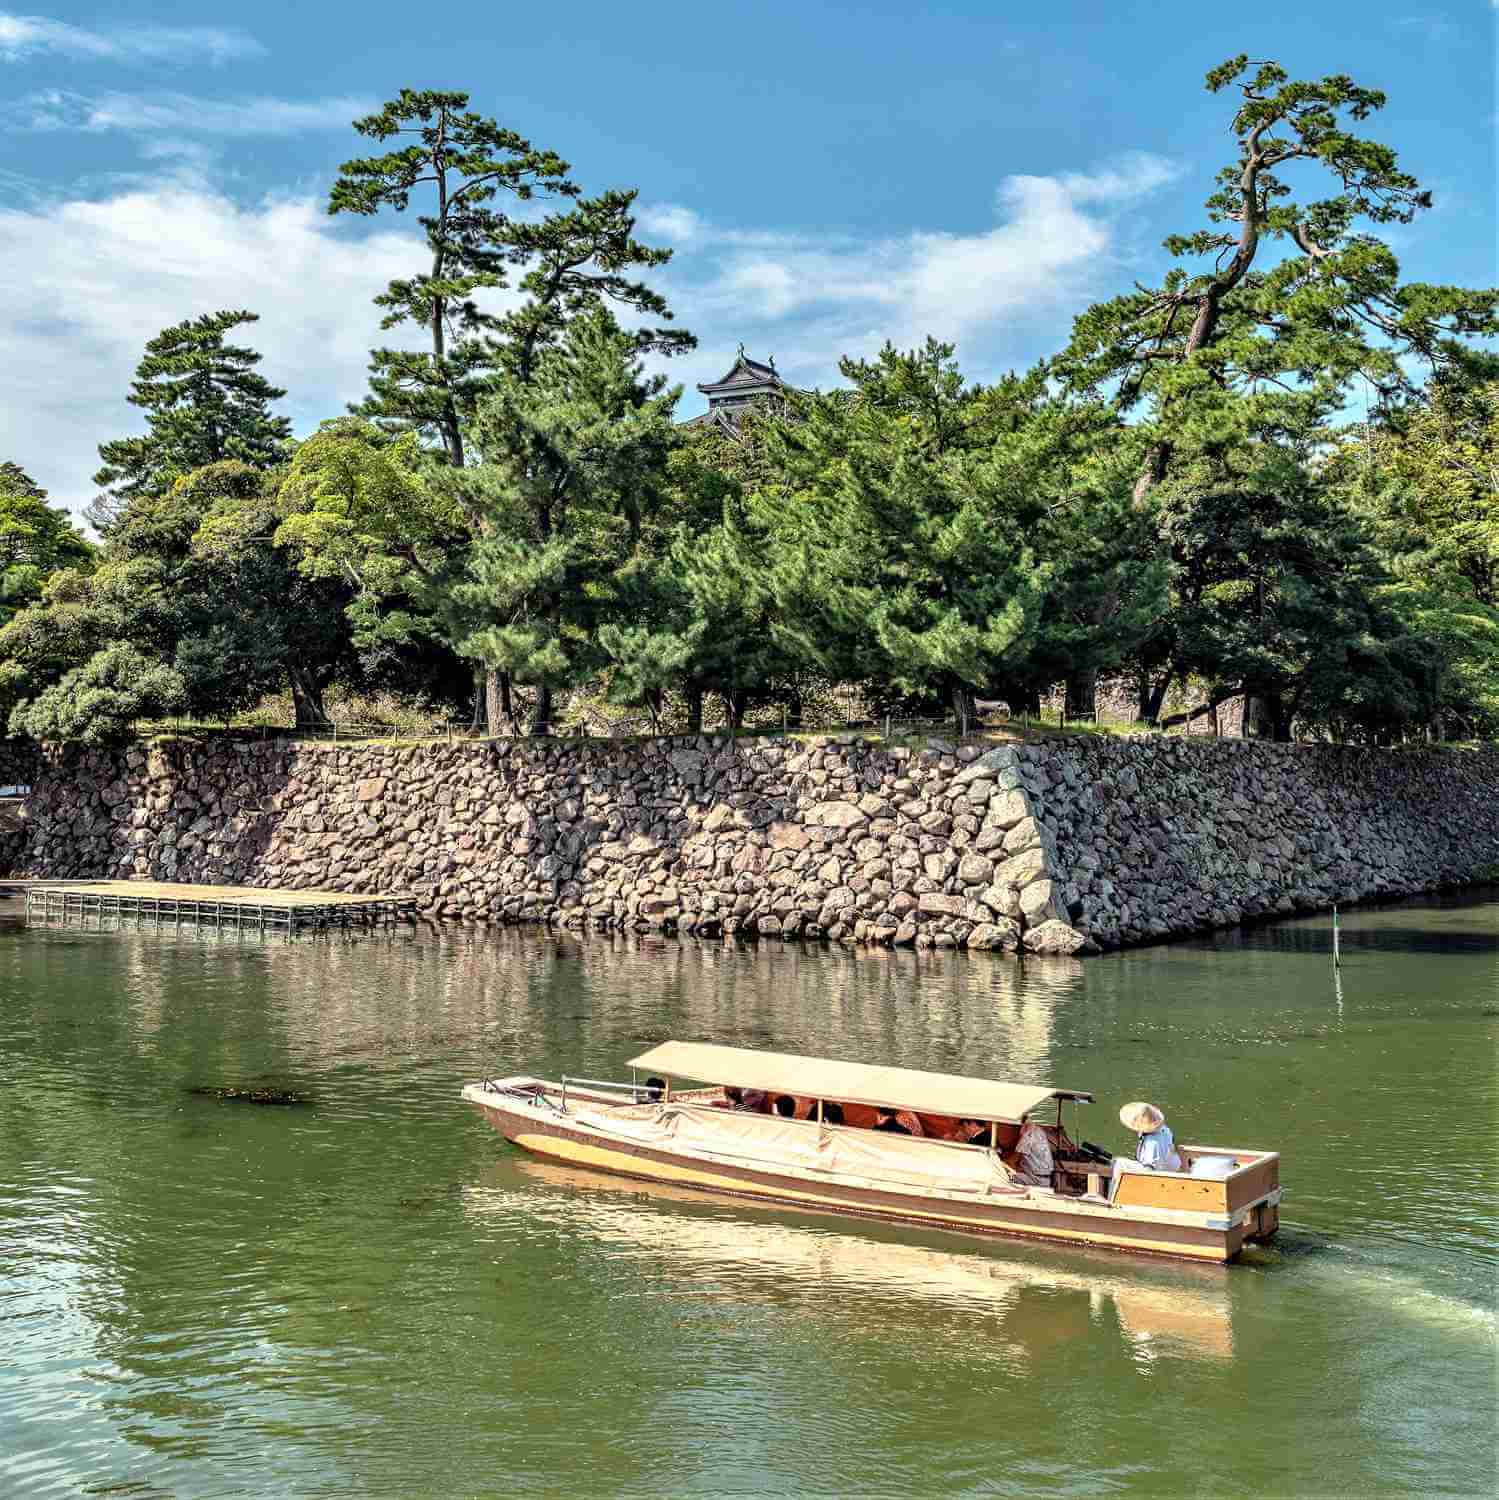 A boat for exploring the moat of Matsue Castle, Shimane Prefecture = Shutterstock